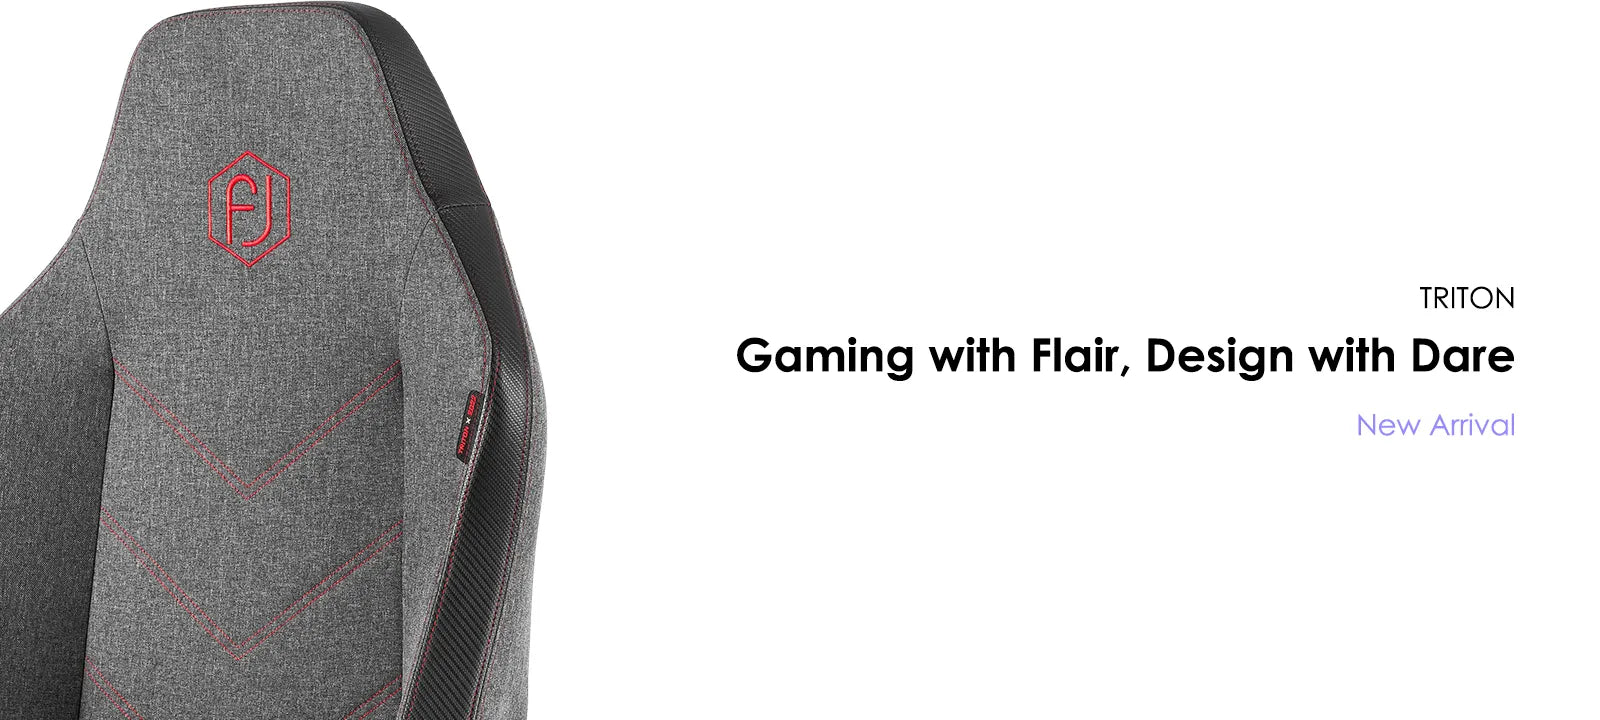 Modern grey gaming chair with embroidered logo and red stitching accents labeled as 'Gaming with Flair, Design with Dare - New Arrival' by TRITON.